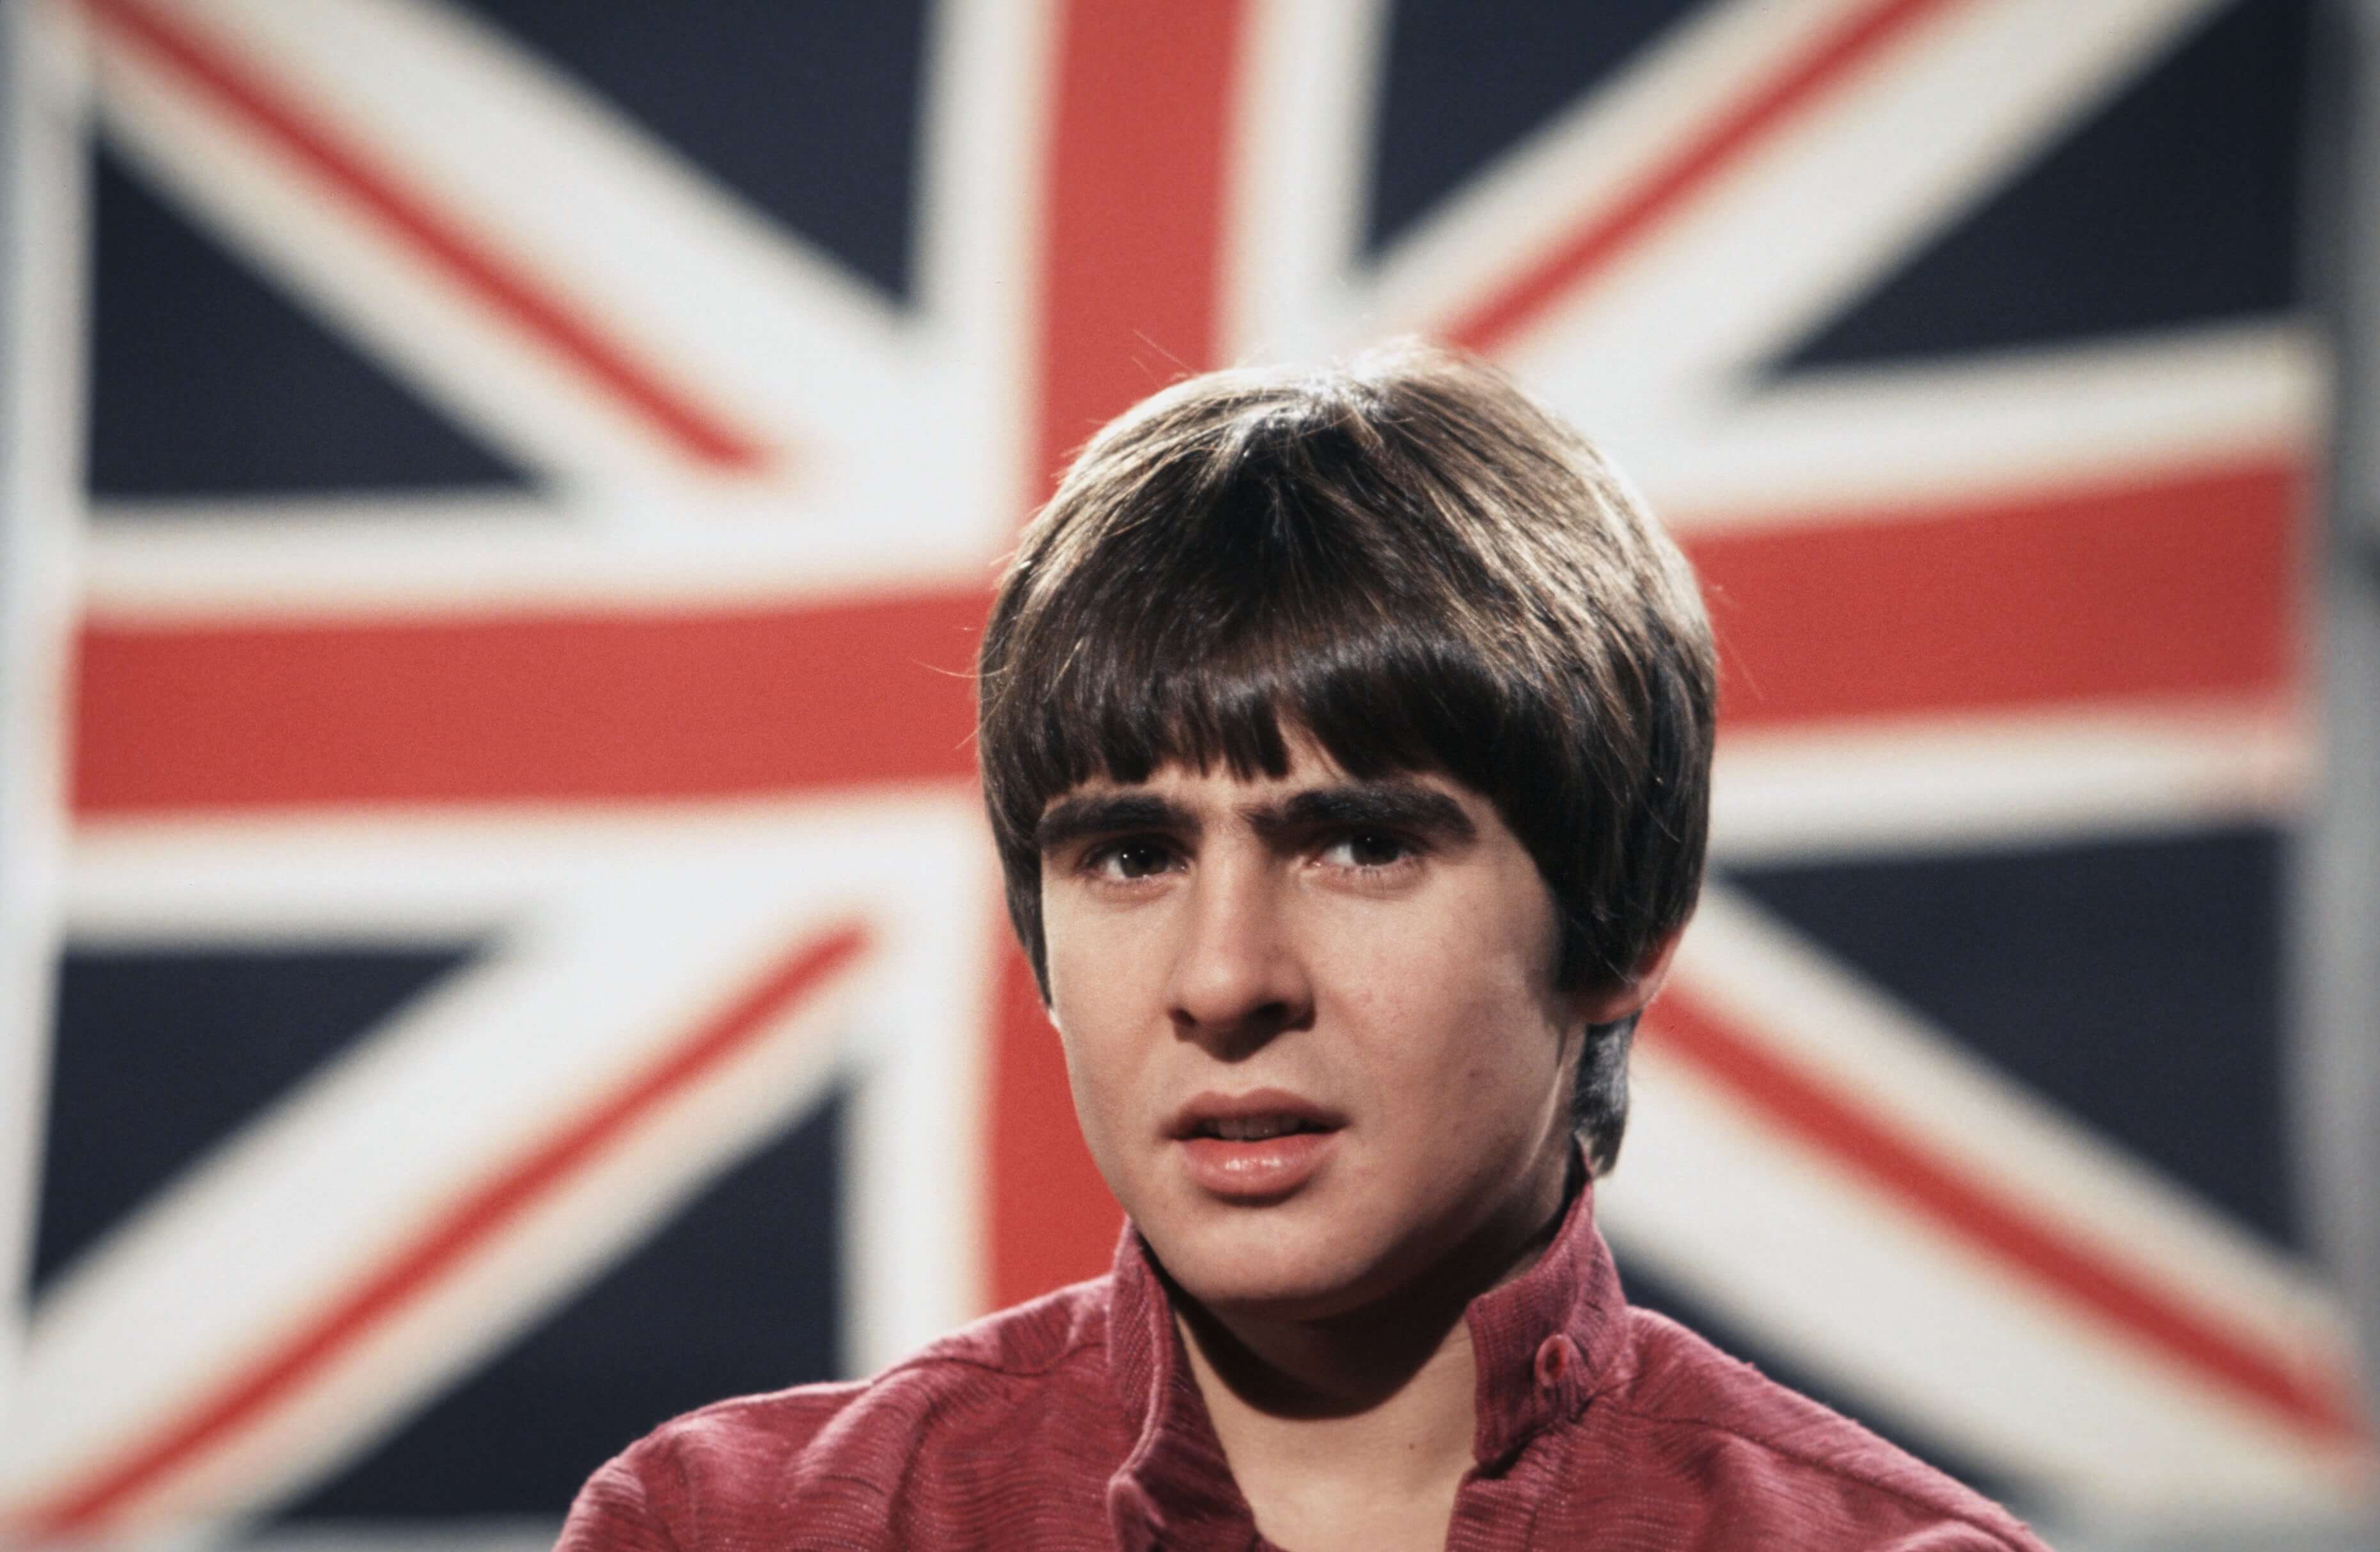 The Monkees' Davy Jones and a flag